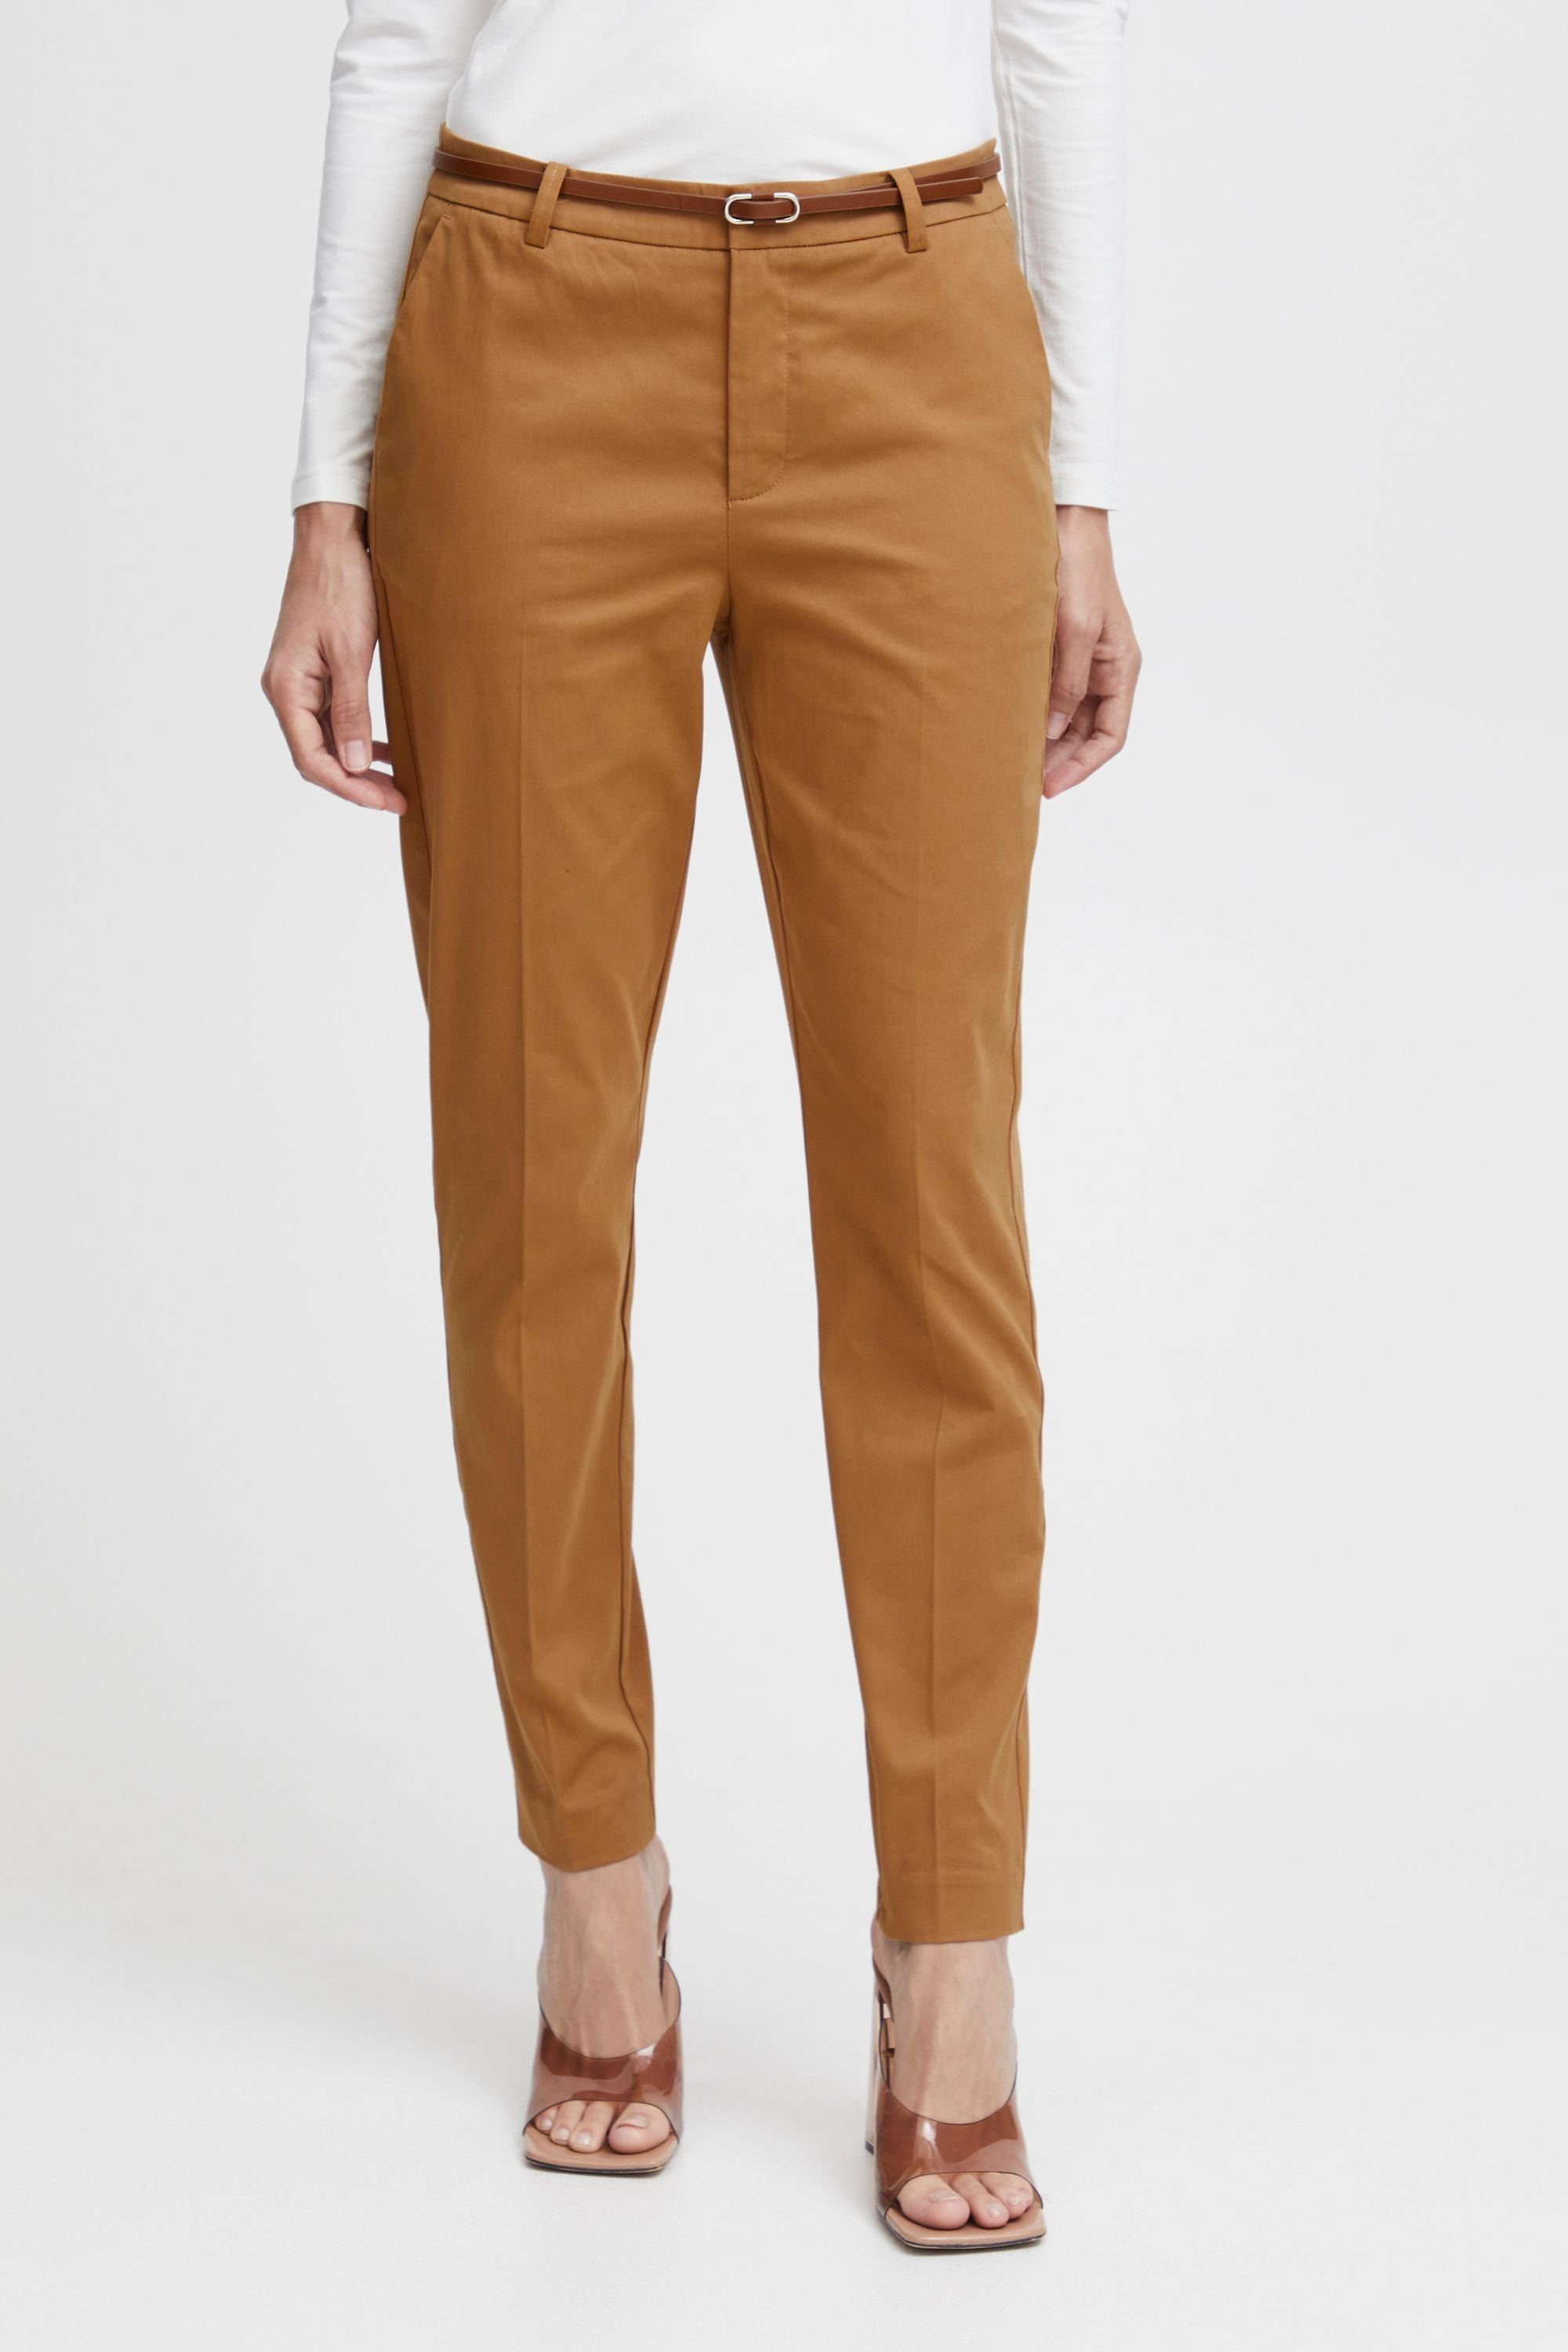 Chinohose Coconut im 20803473 BYDays Chinostyle Toasted b.young Lange Hose 2 cigaret (181029) pants - coolen